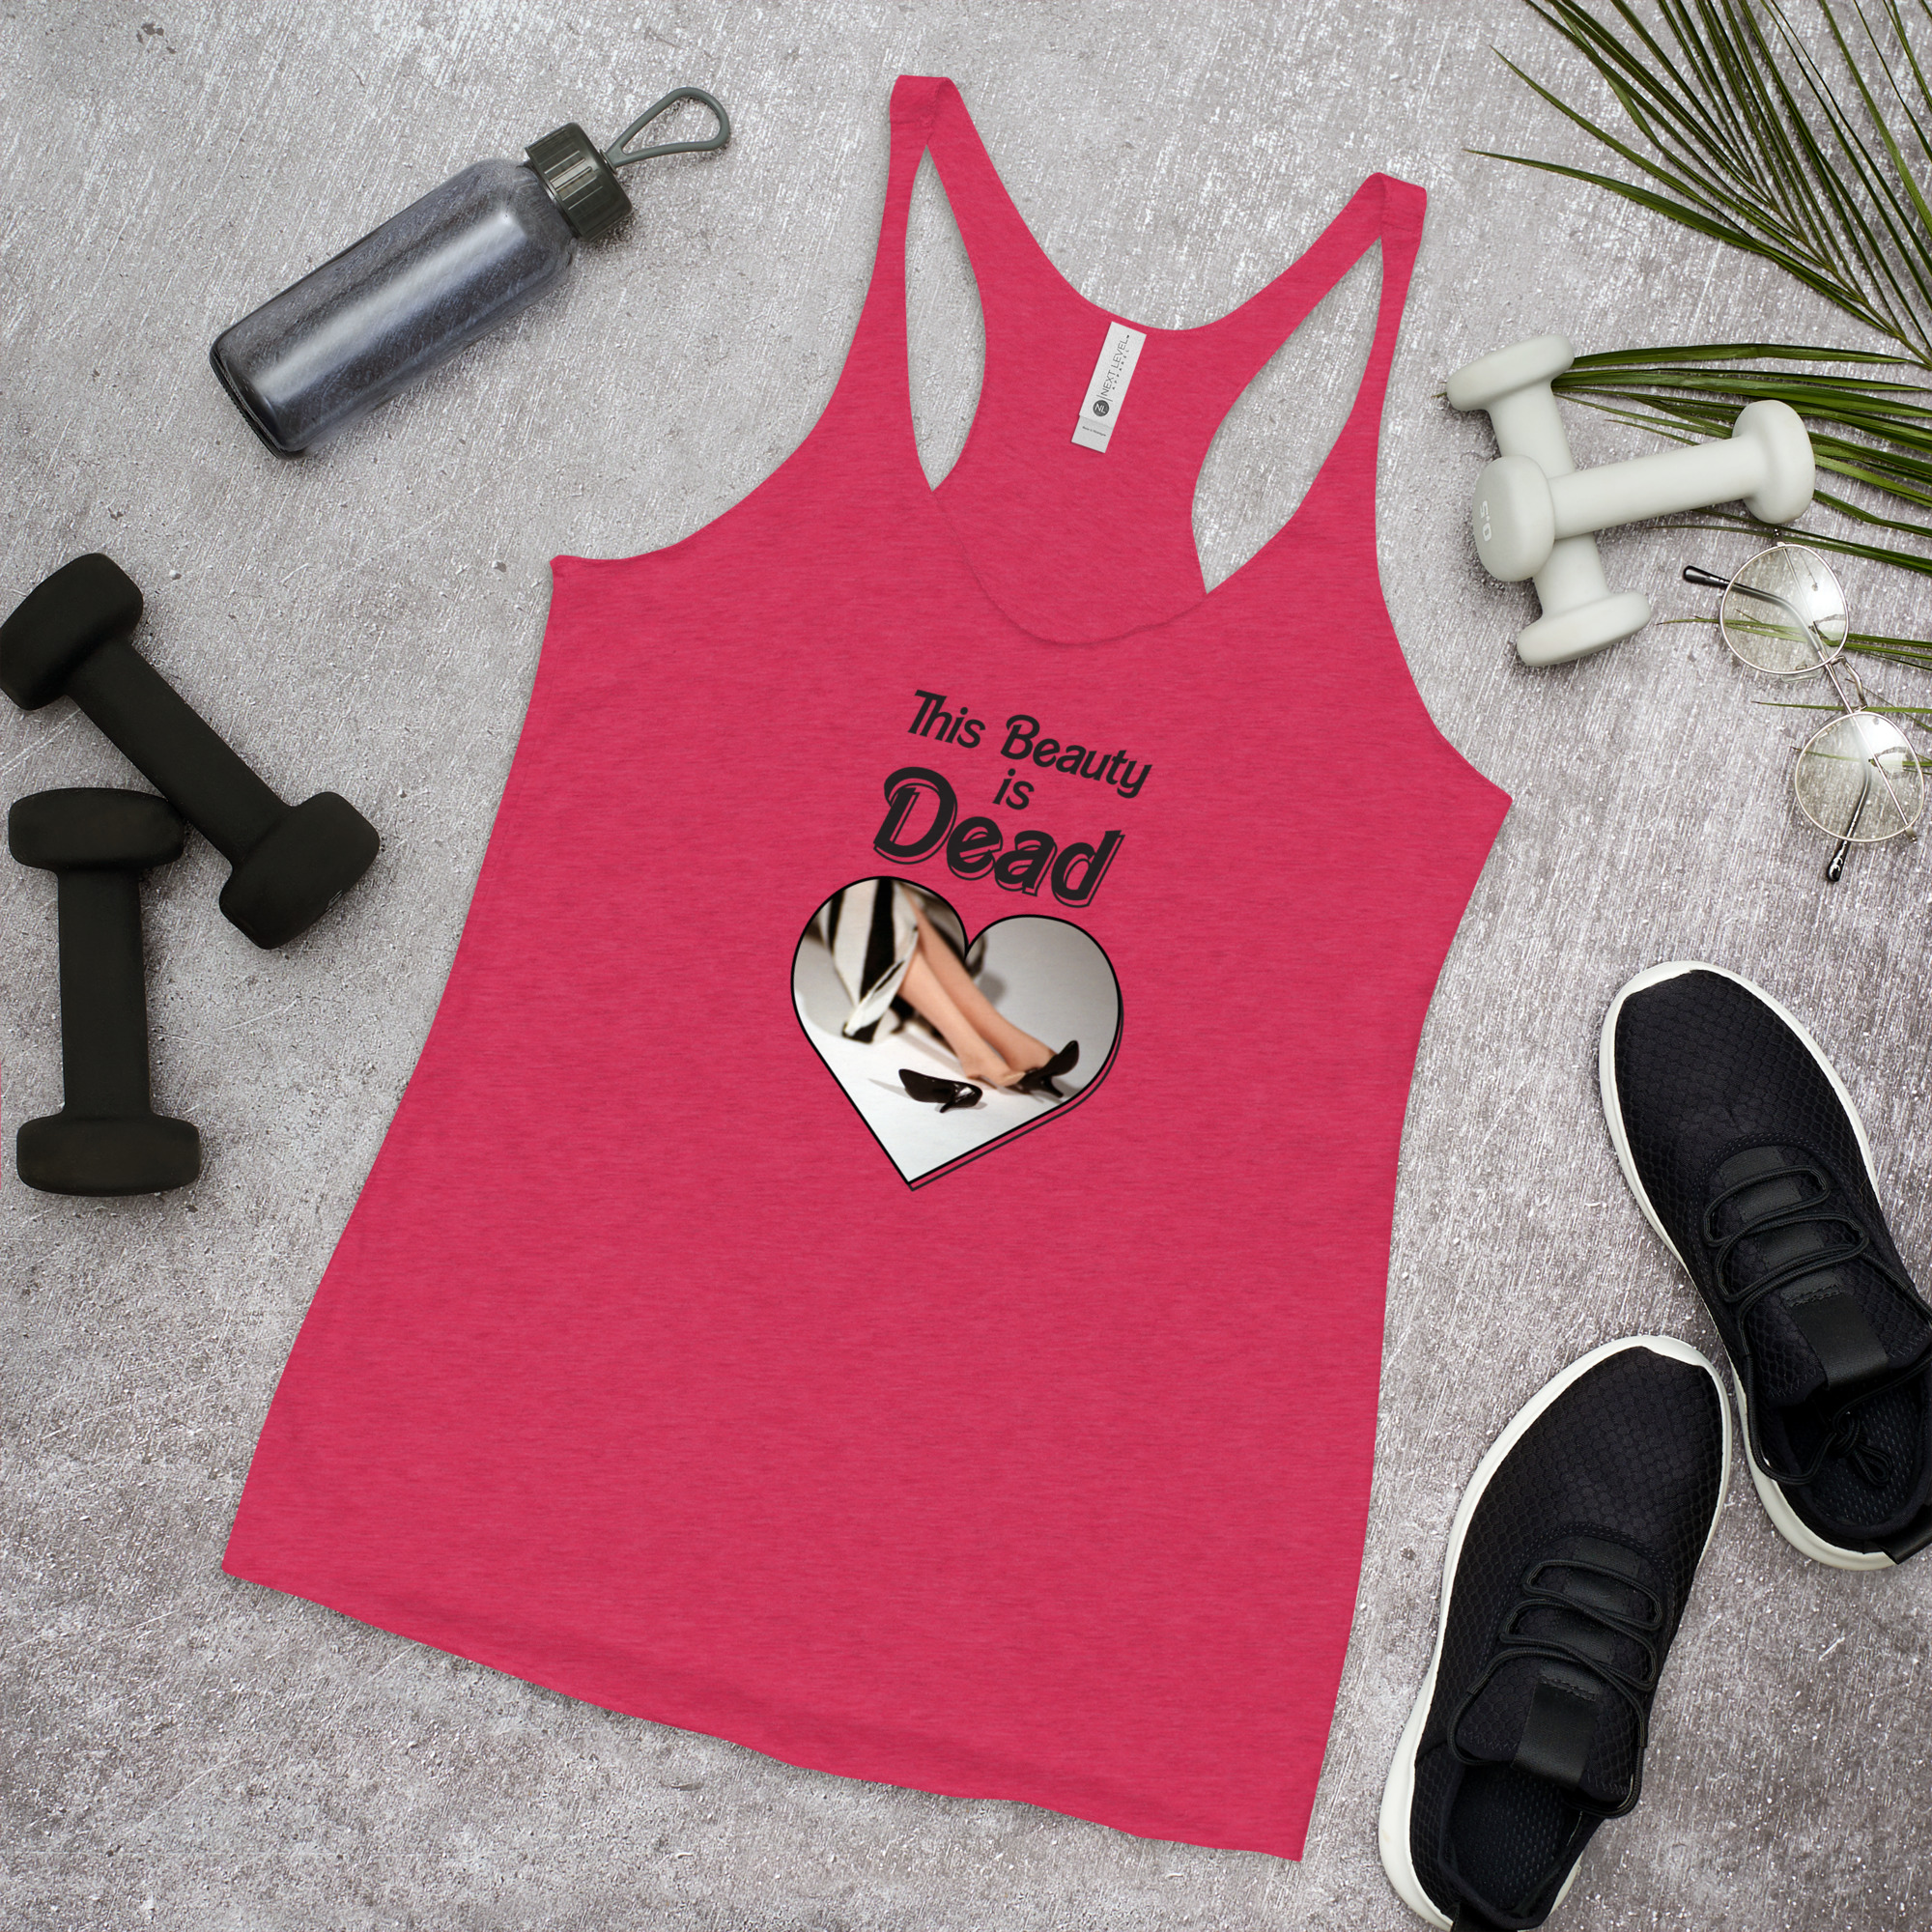 This Beauty is Dead tank top by Wilde Designs